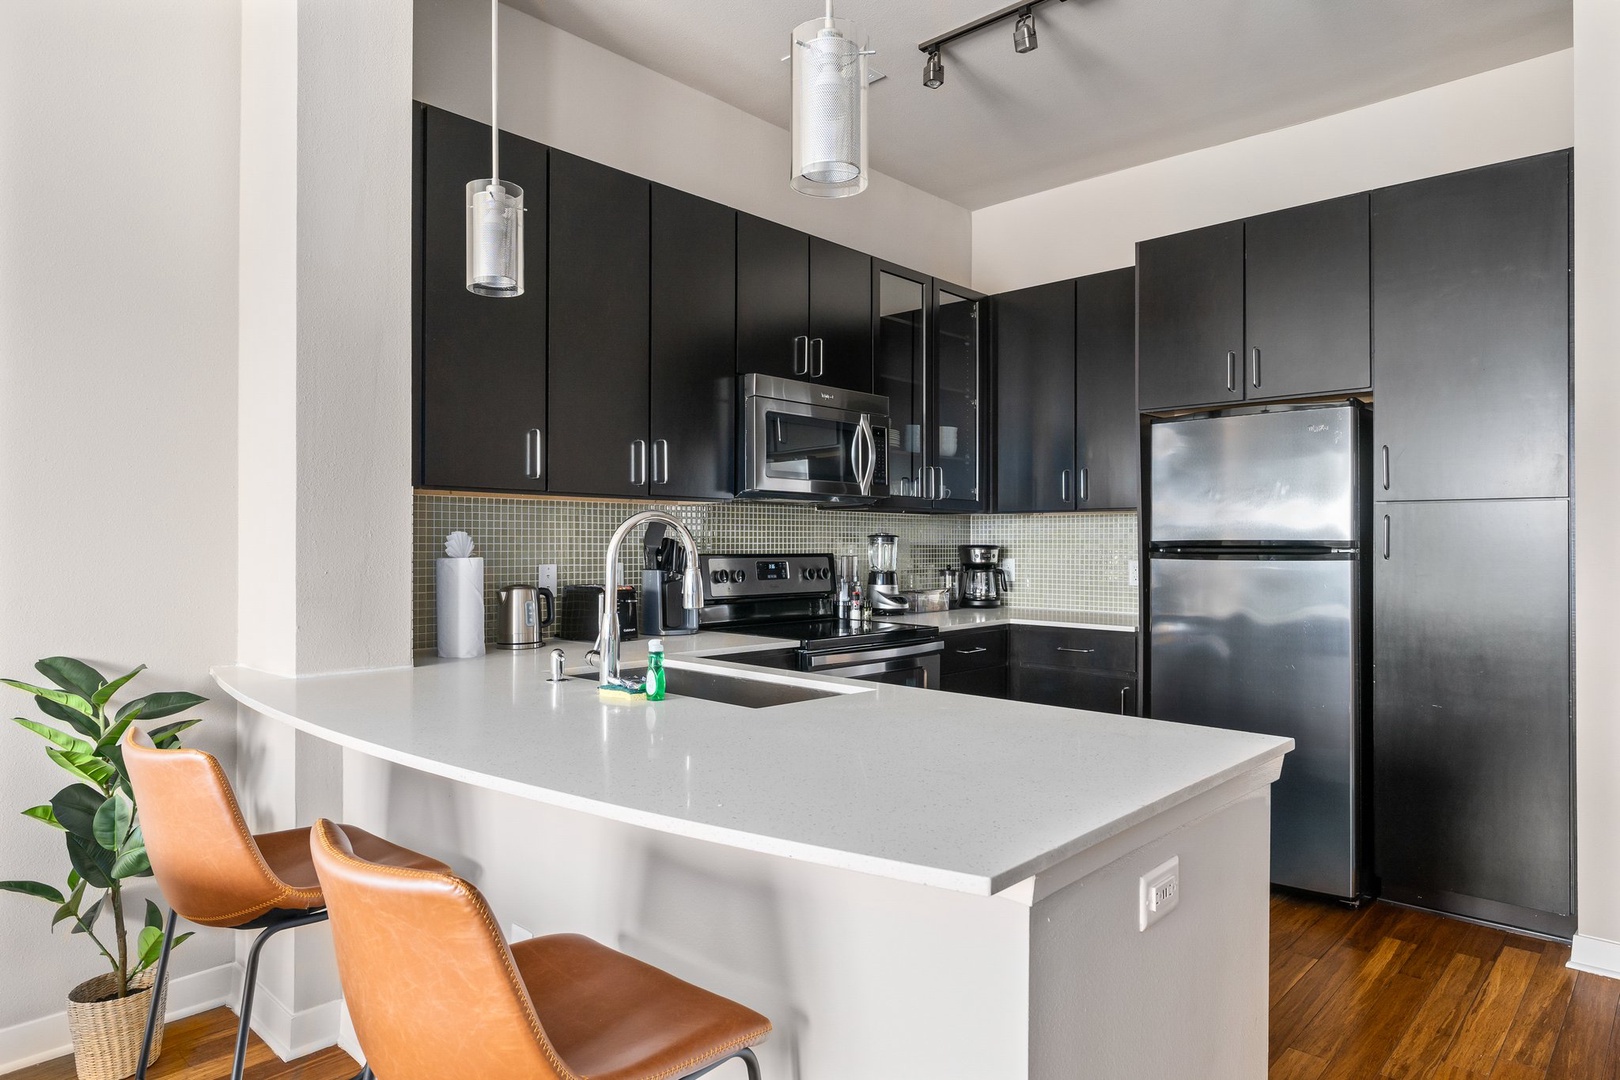 Make memorable meals in this well-appointed kitchen with modern amenities.